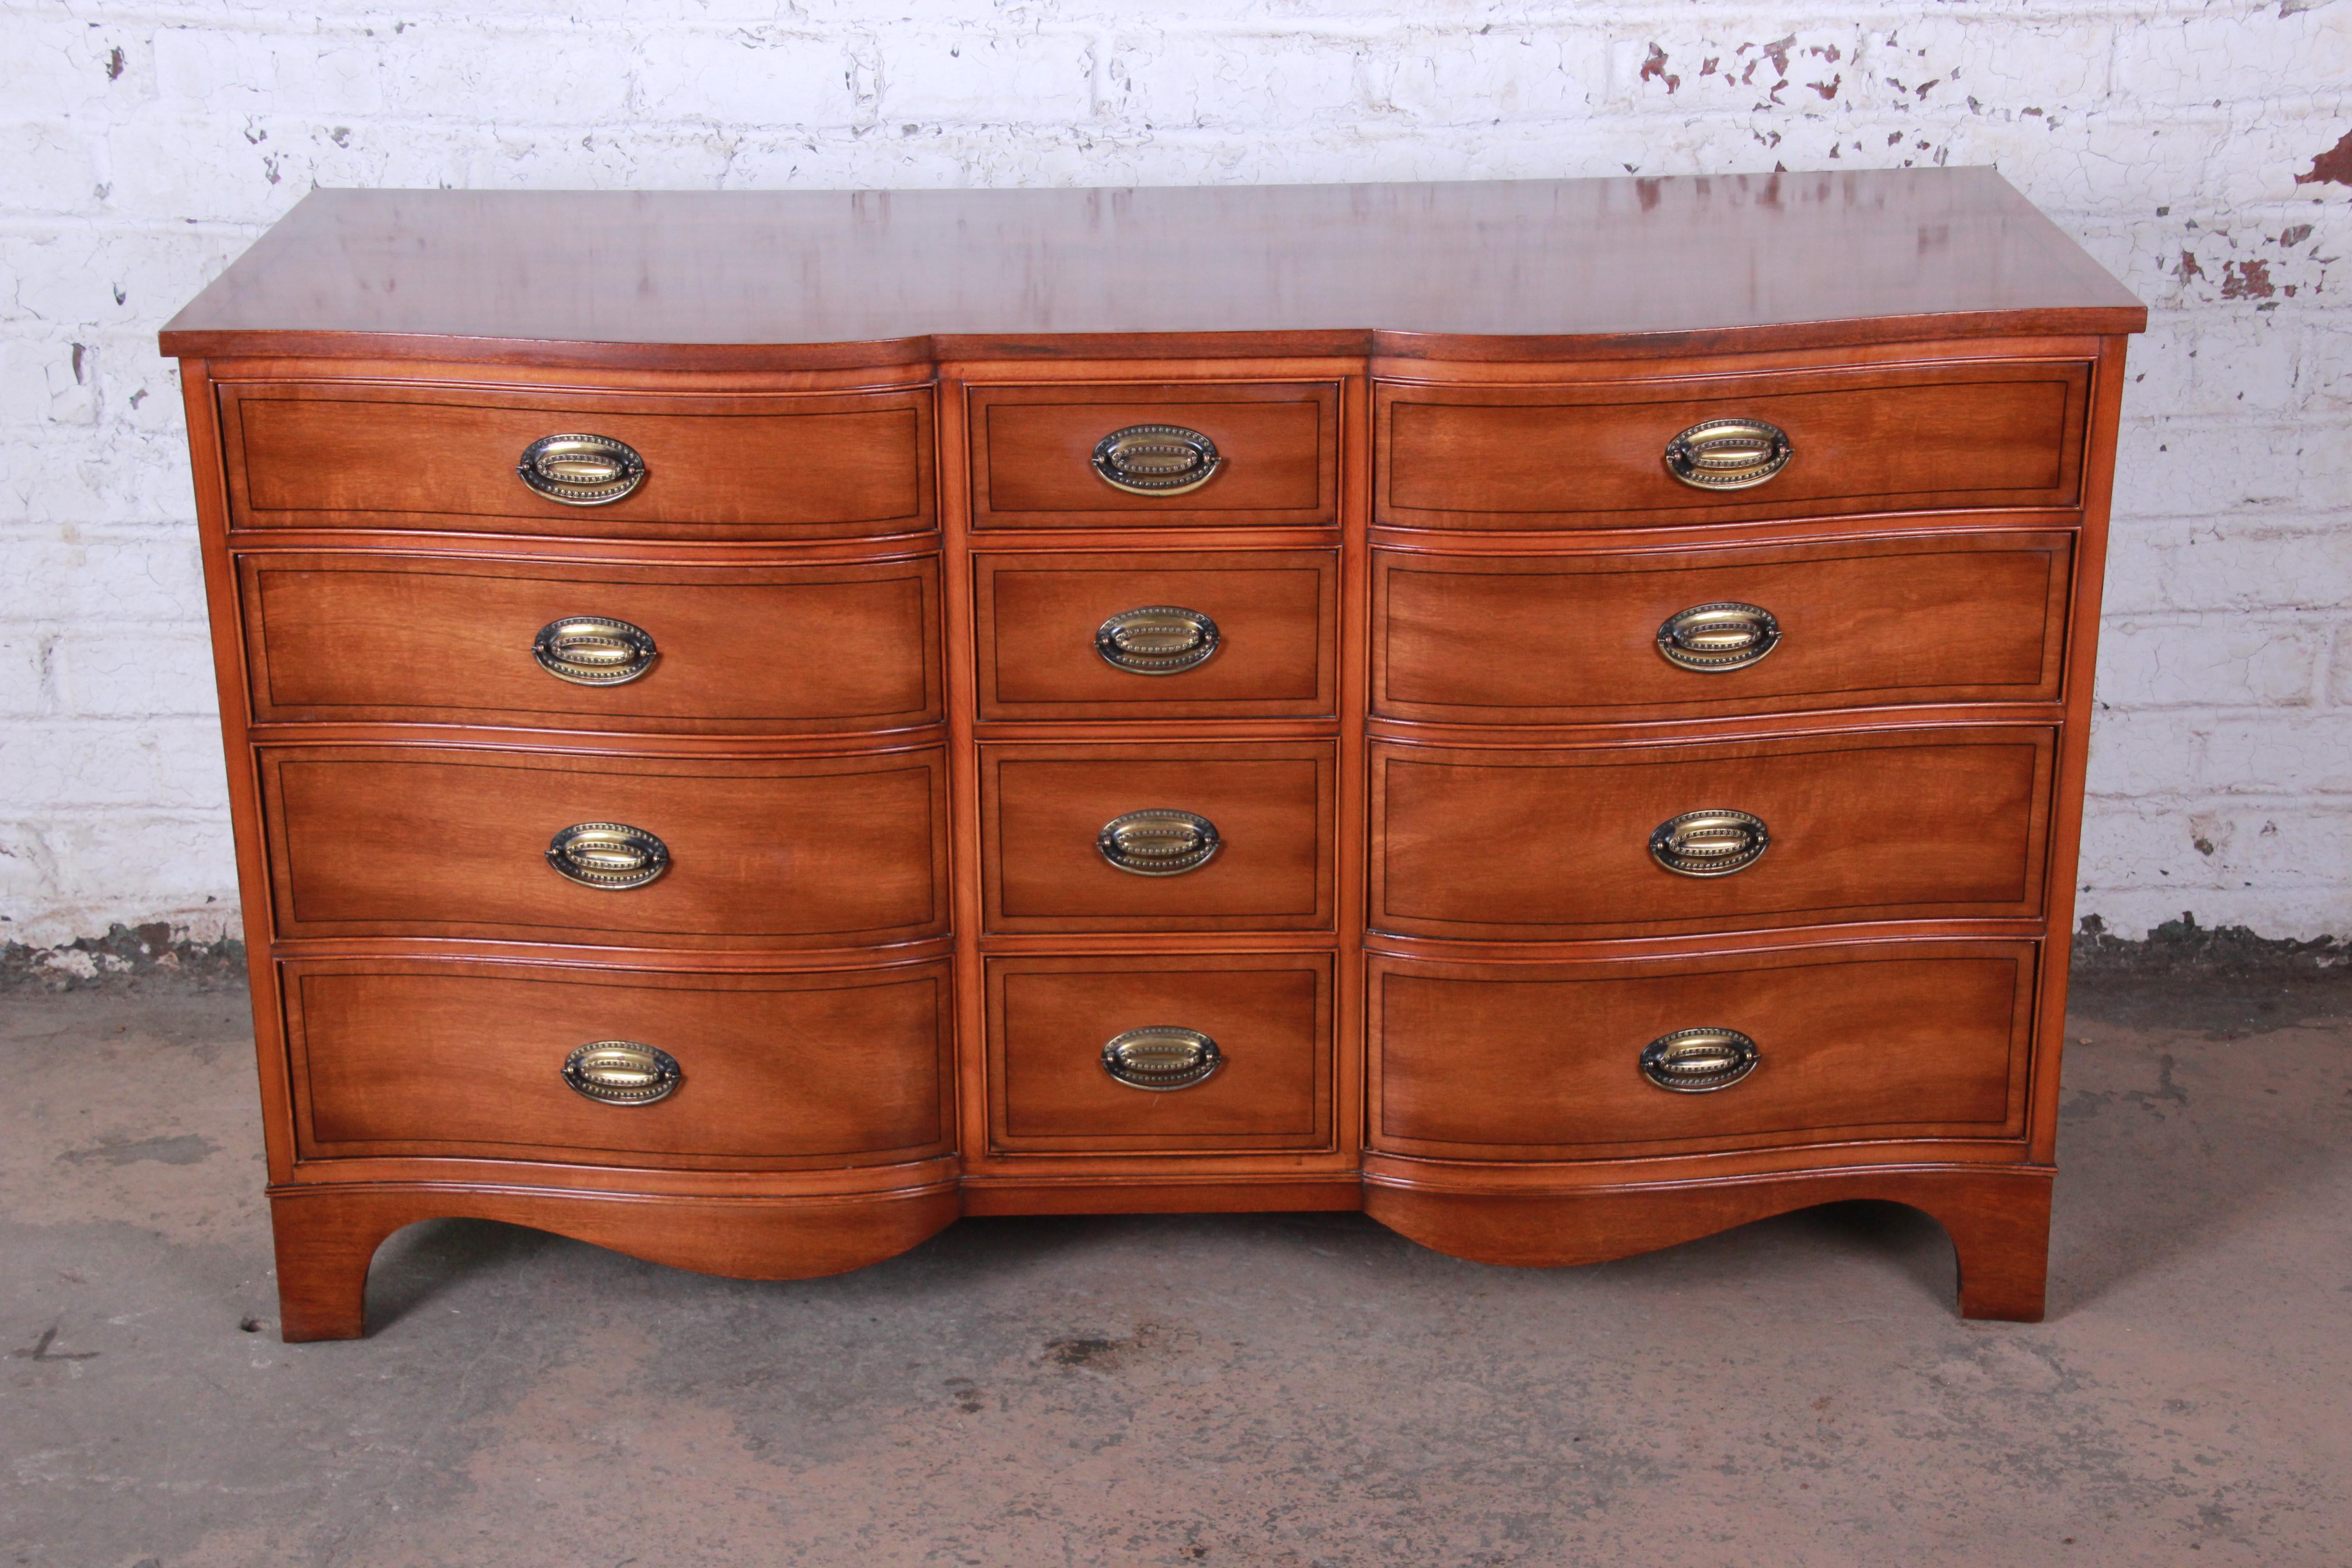 A gorgeous inlaid mahogany twelve-drawer dresser by Heritage Henredon. The dresser features stunning mahogany wood grain and a nice traditional style. It offers ample storage, with twelve deep dovetailed drawers. The original Heritage Henredon label